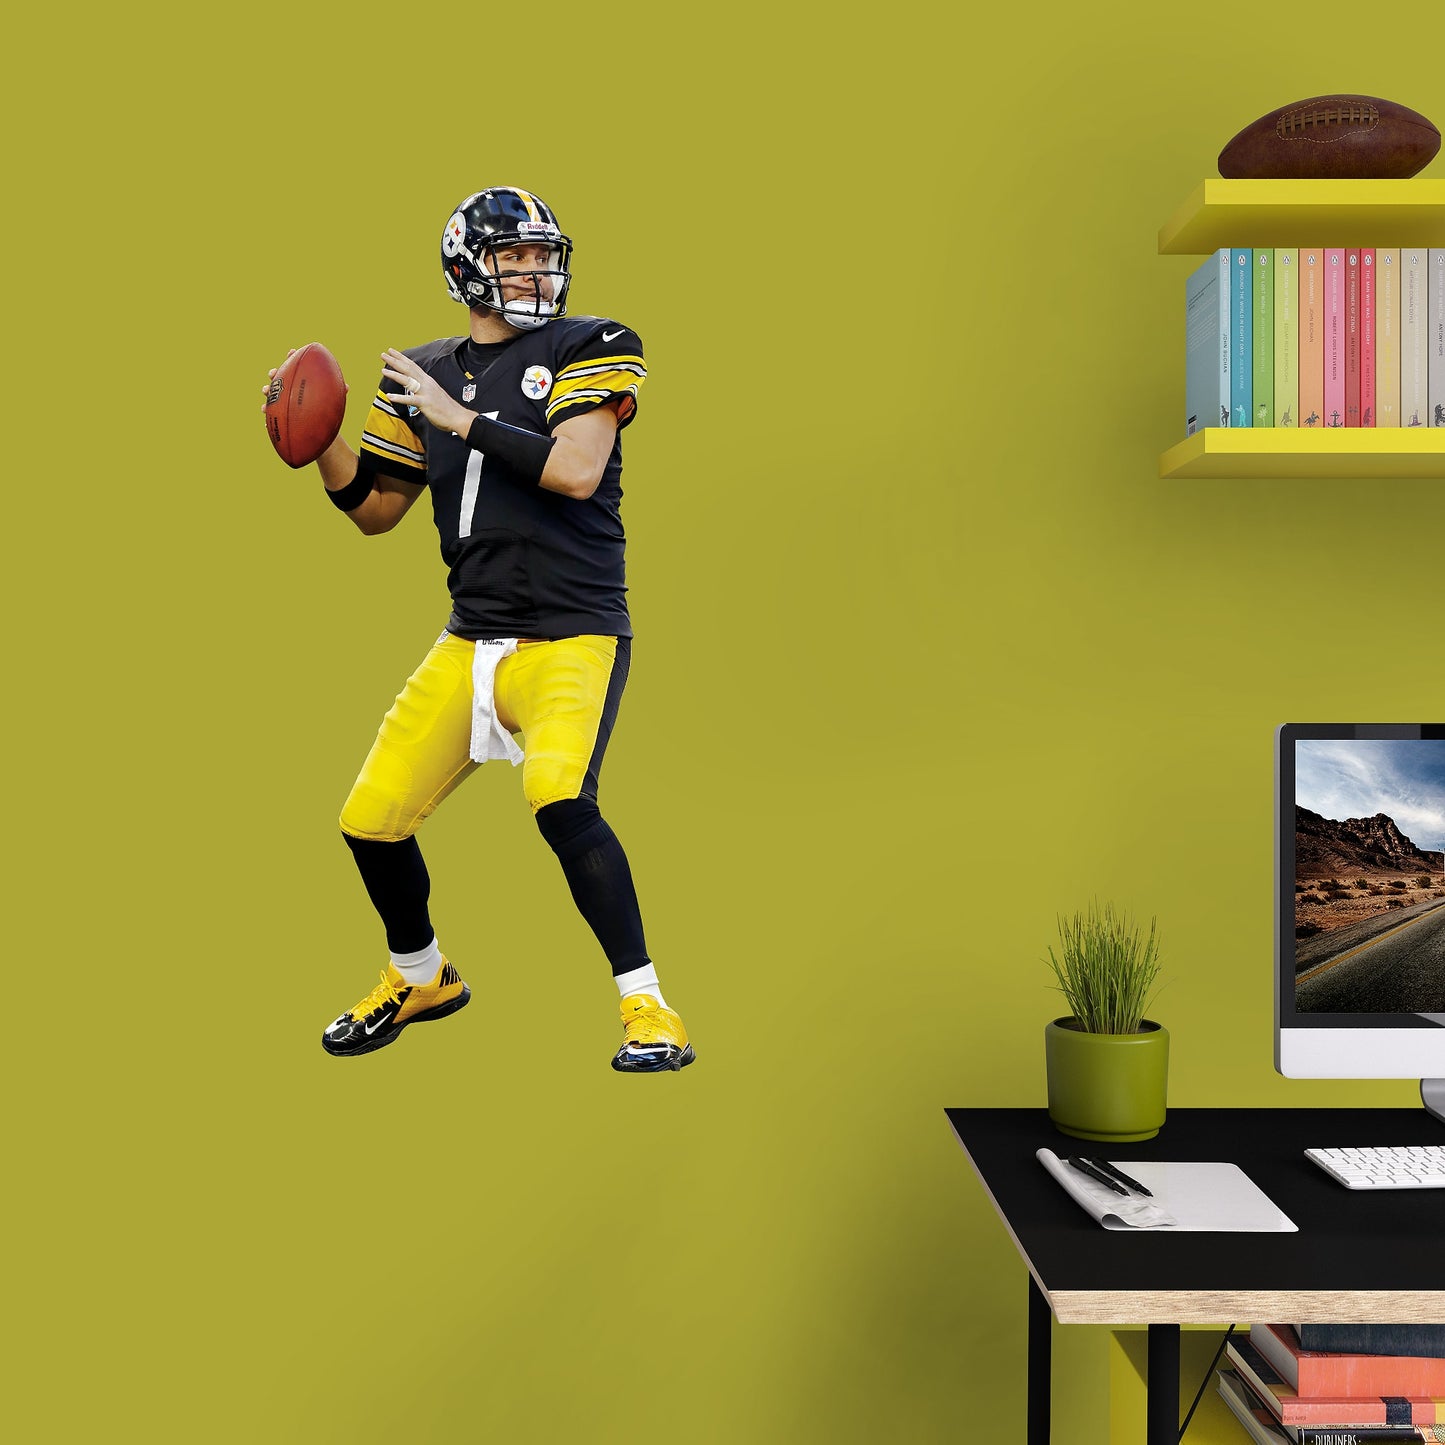 Bring the action of the NFL into your home with a wall decal of your favorite player! High quality, durable, and tear resistant, you'll be able to stick and move it as many times as you want to create the ultimate football experience in any room!